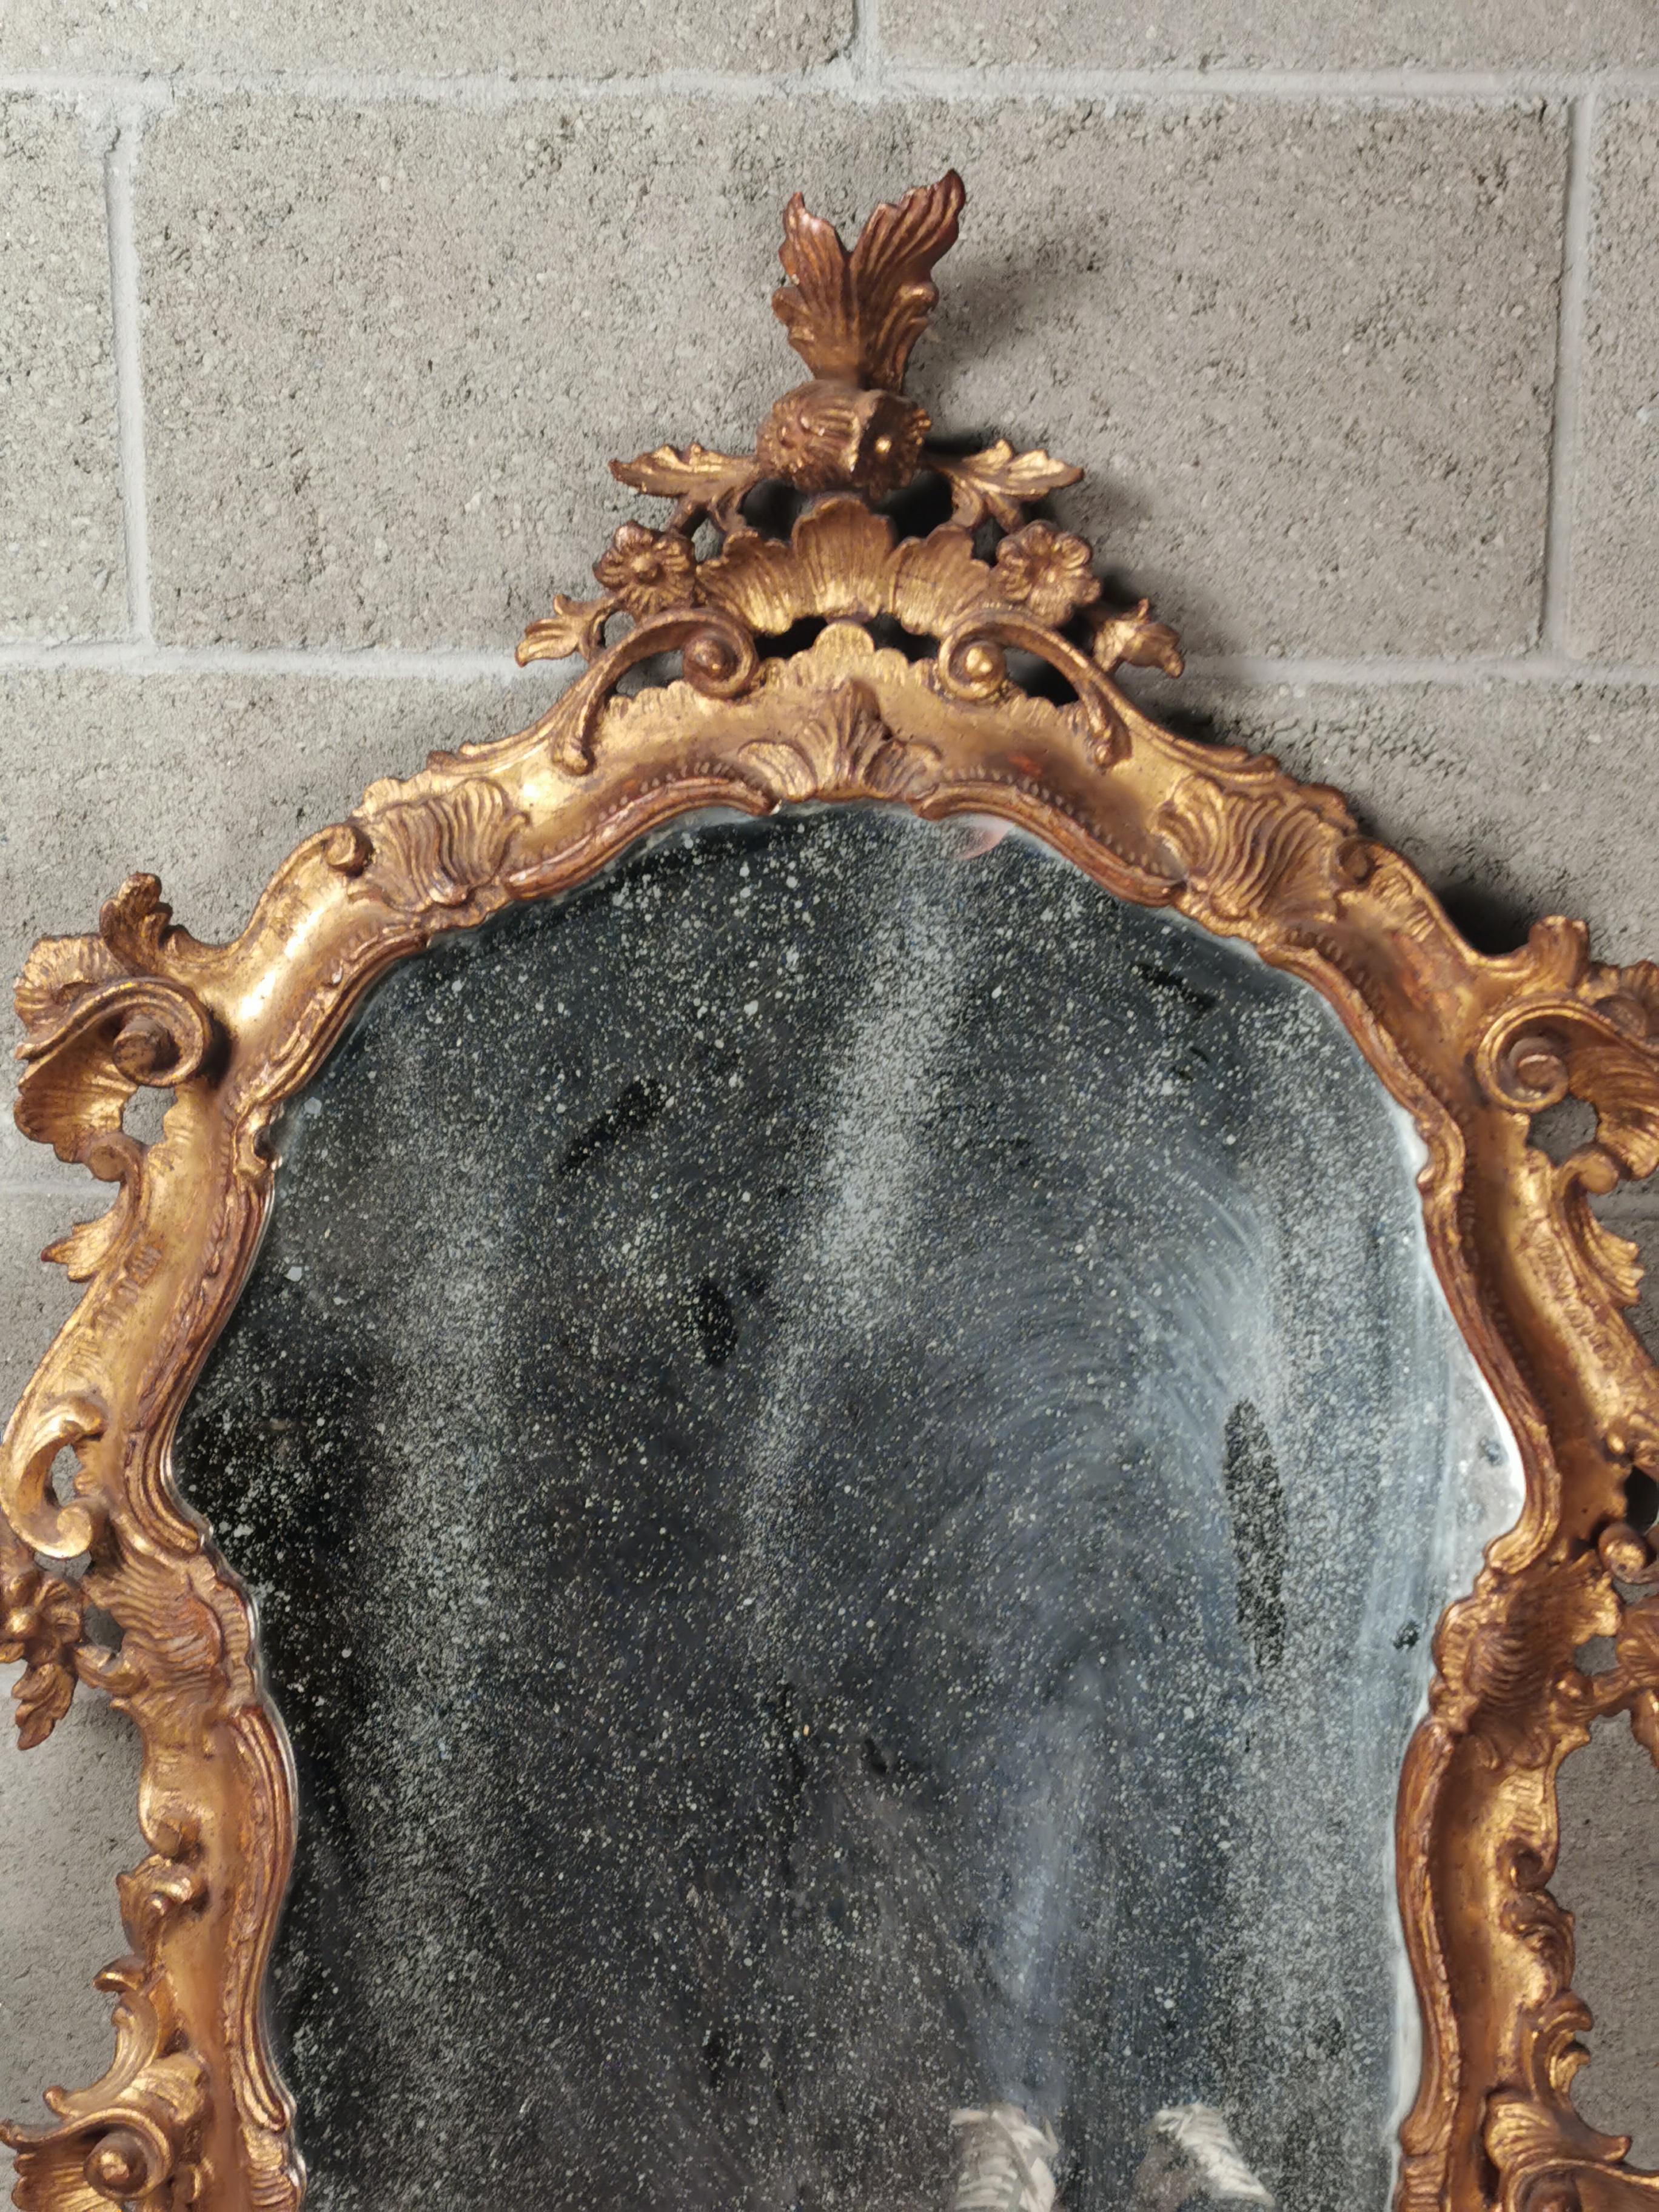 A Magnificent Venetian gilded wall mirror about 1750-1770 Italy. Very particular piece. 
Measures: 75 x 110 cm. Will be shipped inside a secured wood box. 
Mirror frame is in very good condition. Glass part is original and there are signs of agings